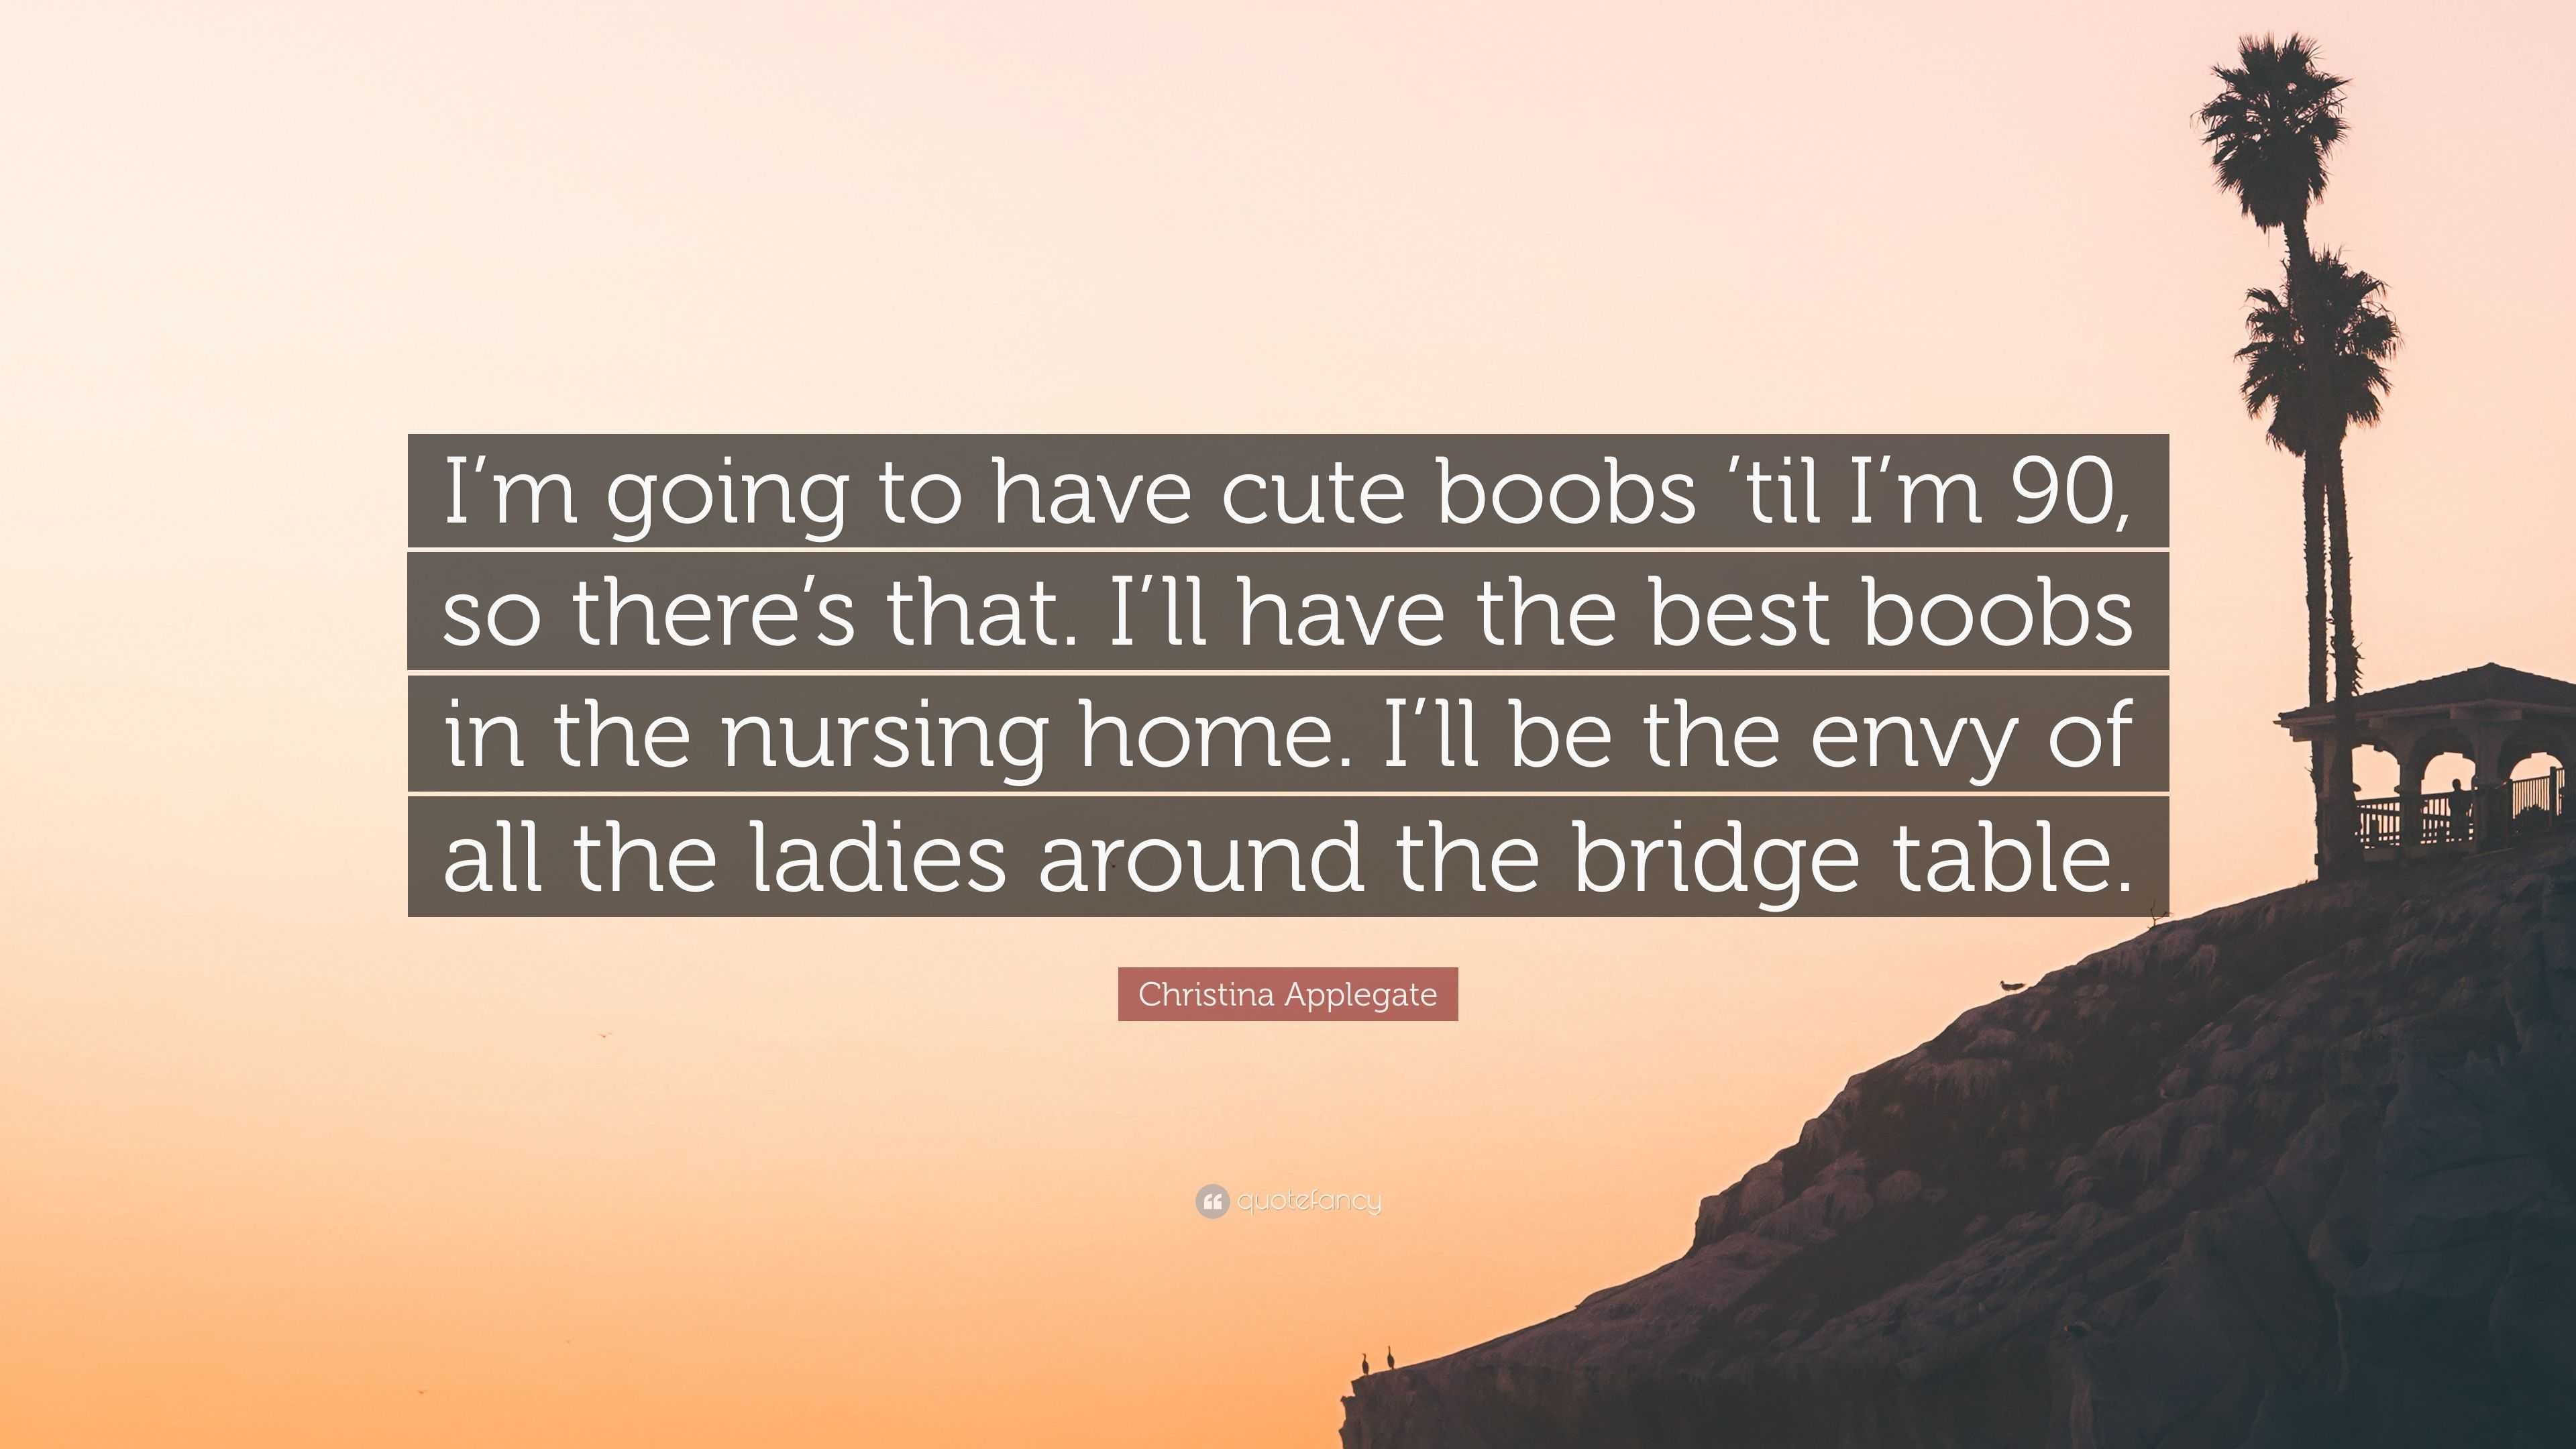 Christina Applegate Quote: “I'm going to have cute boobs 'til I'm